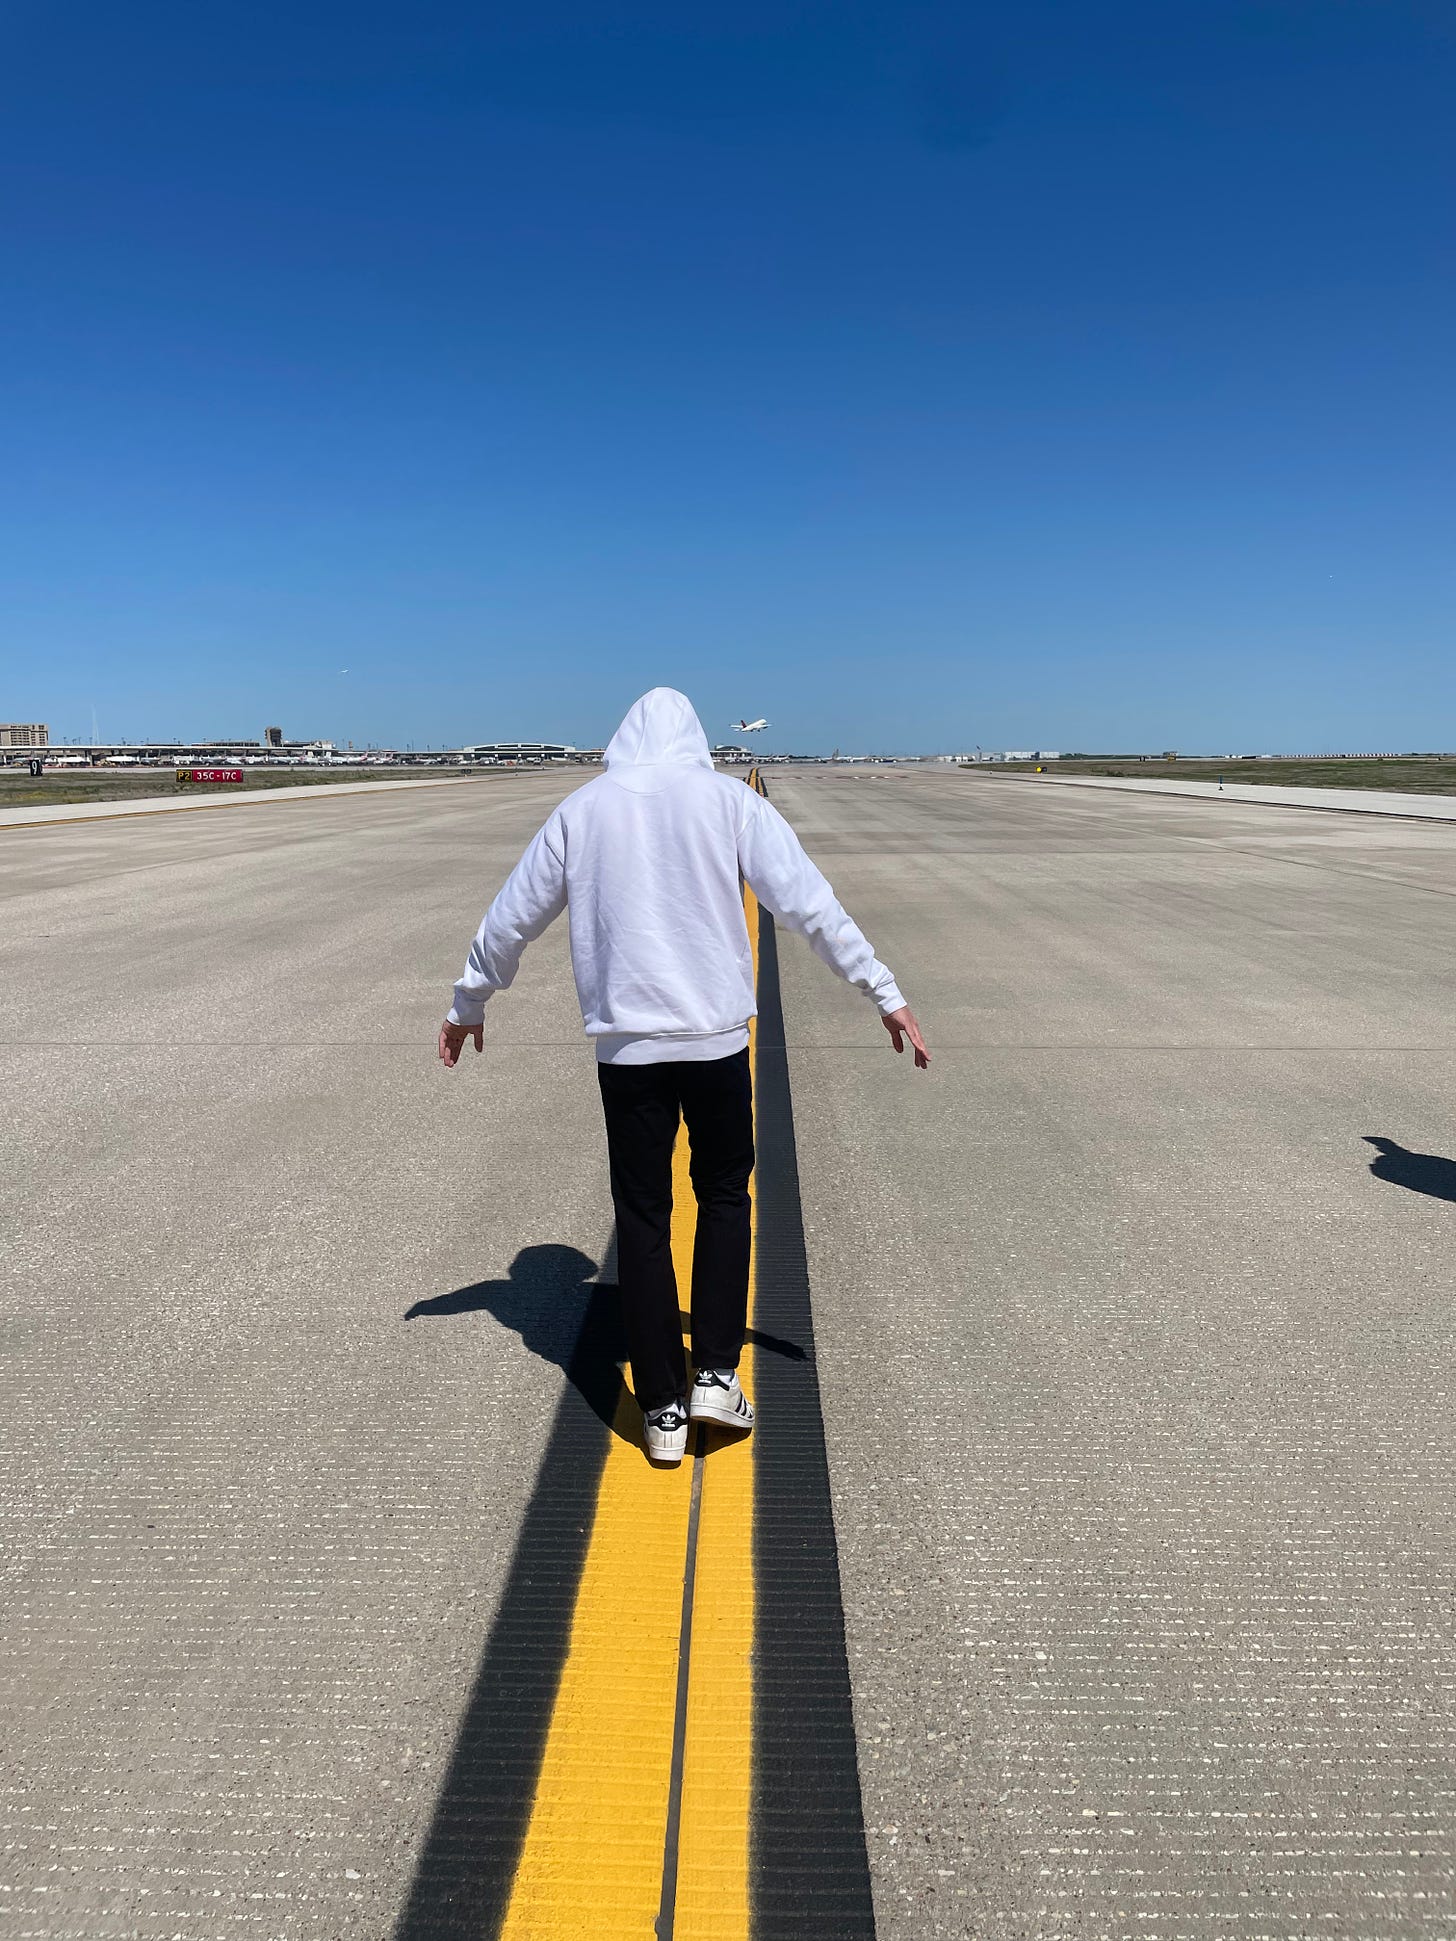 Person walking on taxiway at DFW airport